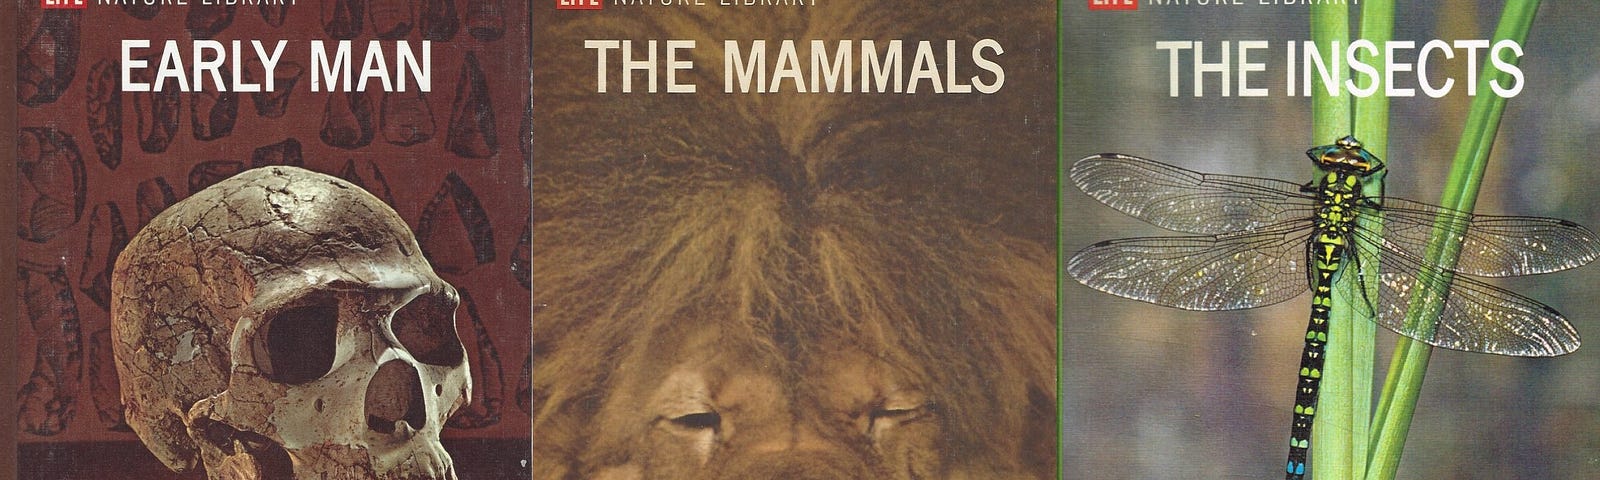 Three covers from the Nature Library series: Early Man (a skull); The Mammals (a lion’s face); The Insects (a dragonfly on a plant).